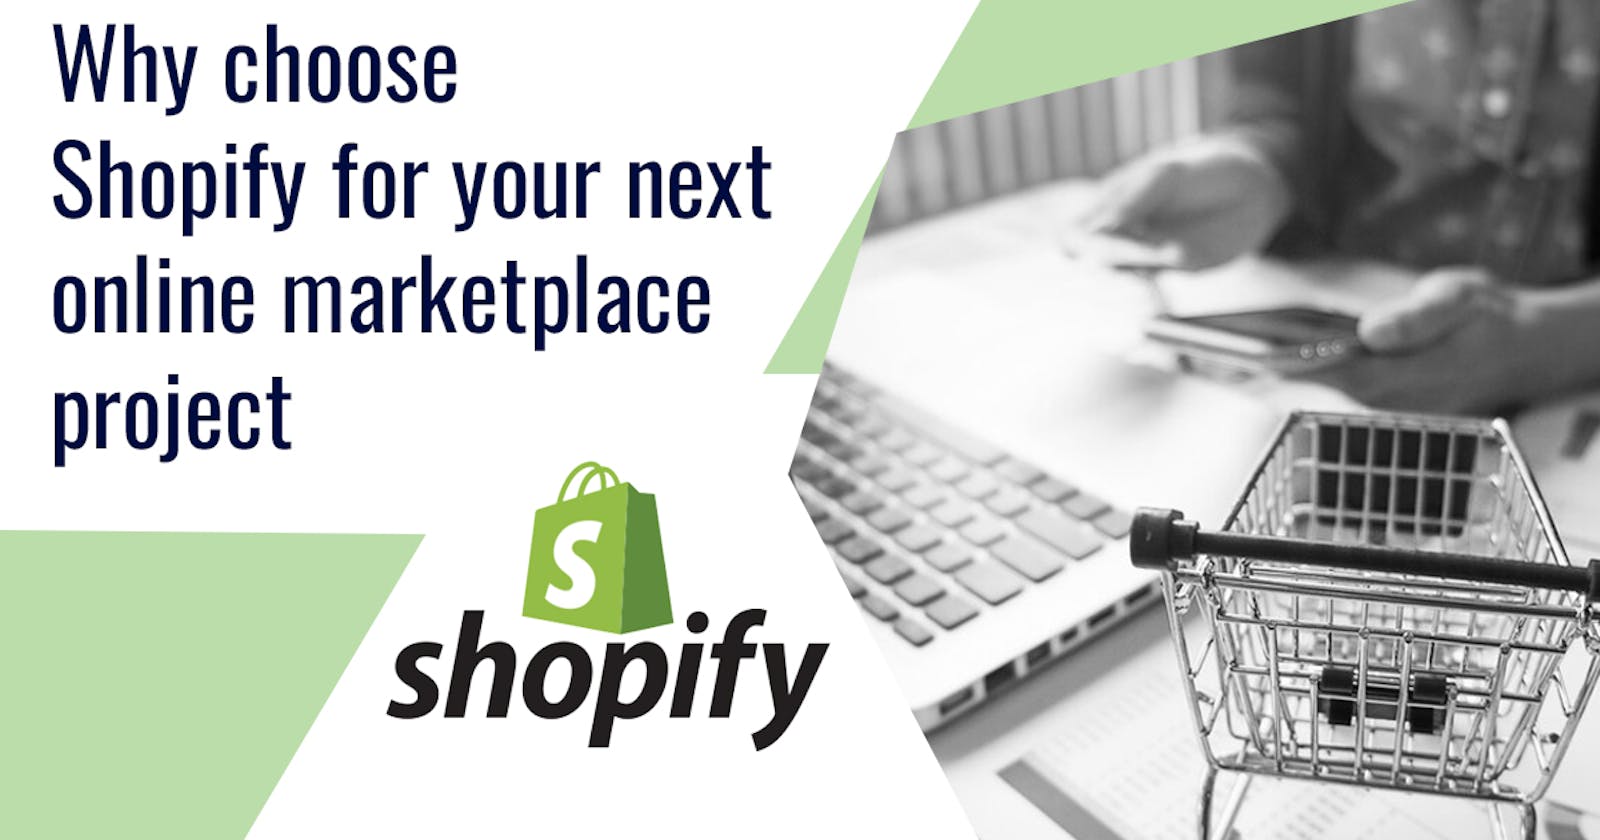 Why Choose Shopify for Your Next Online Marketplace Project